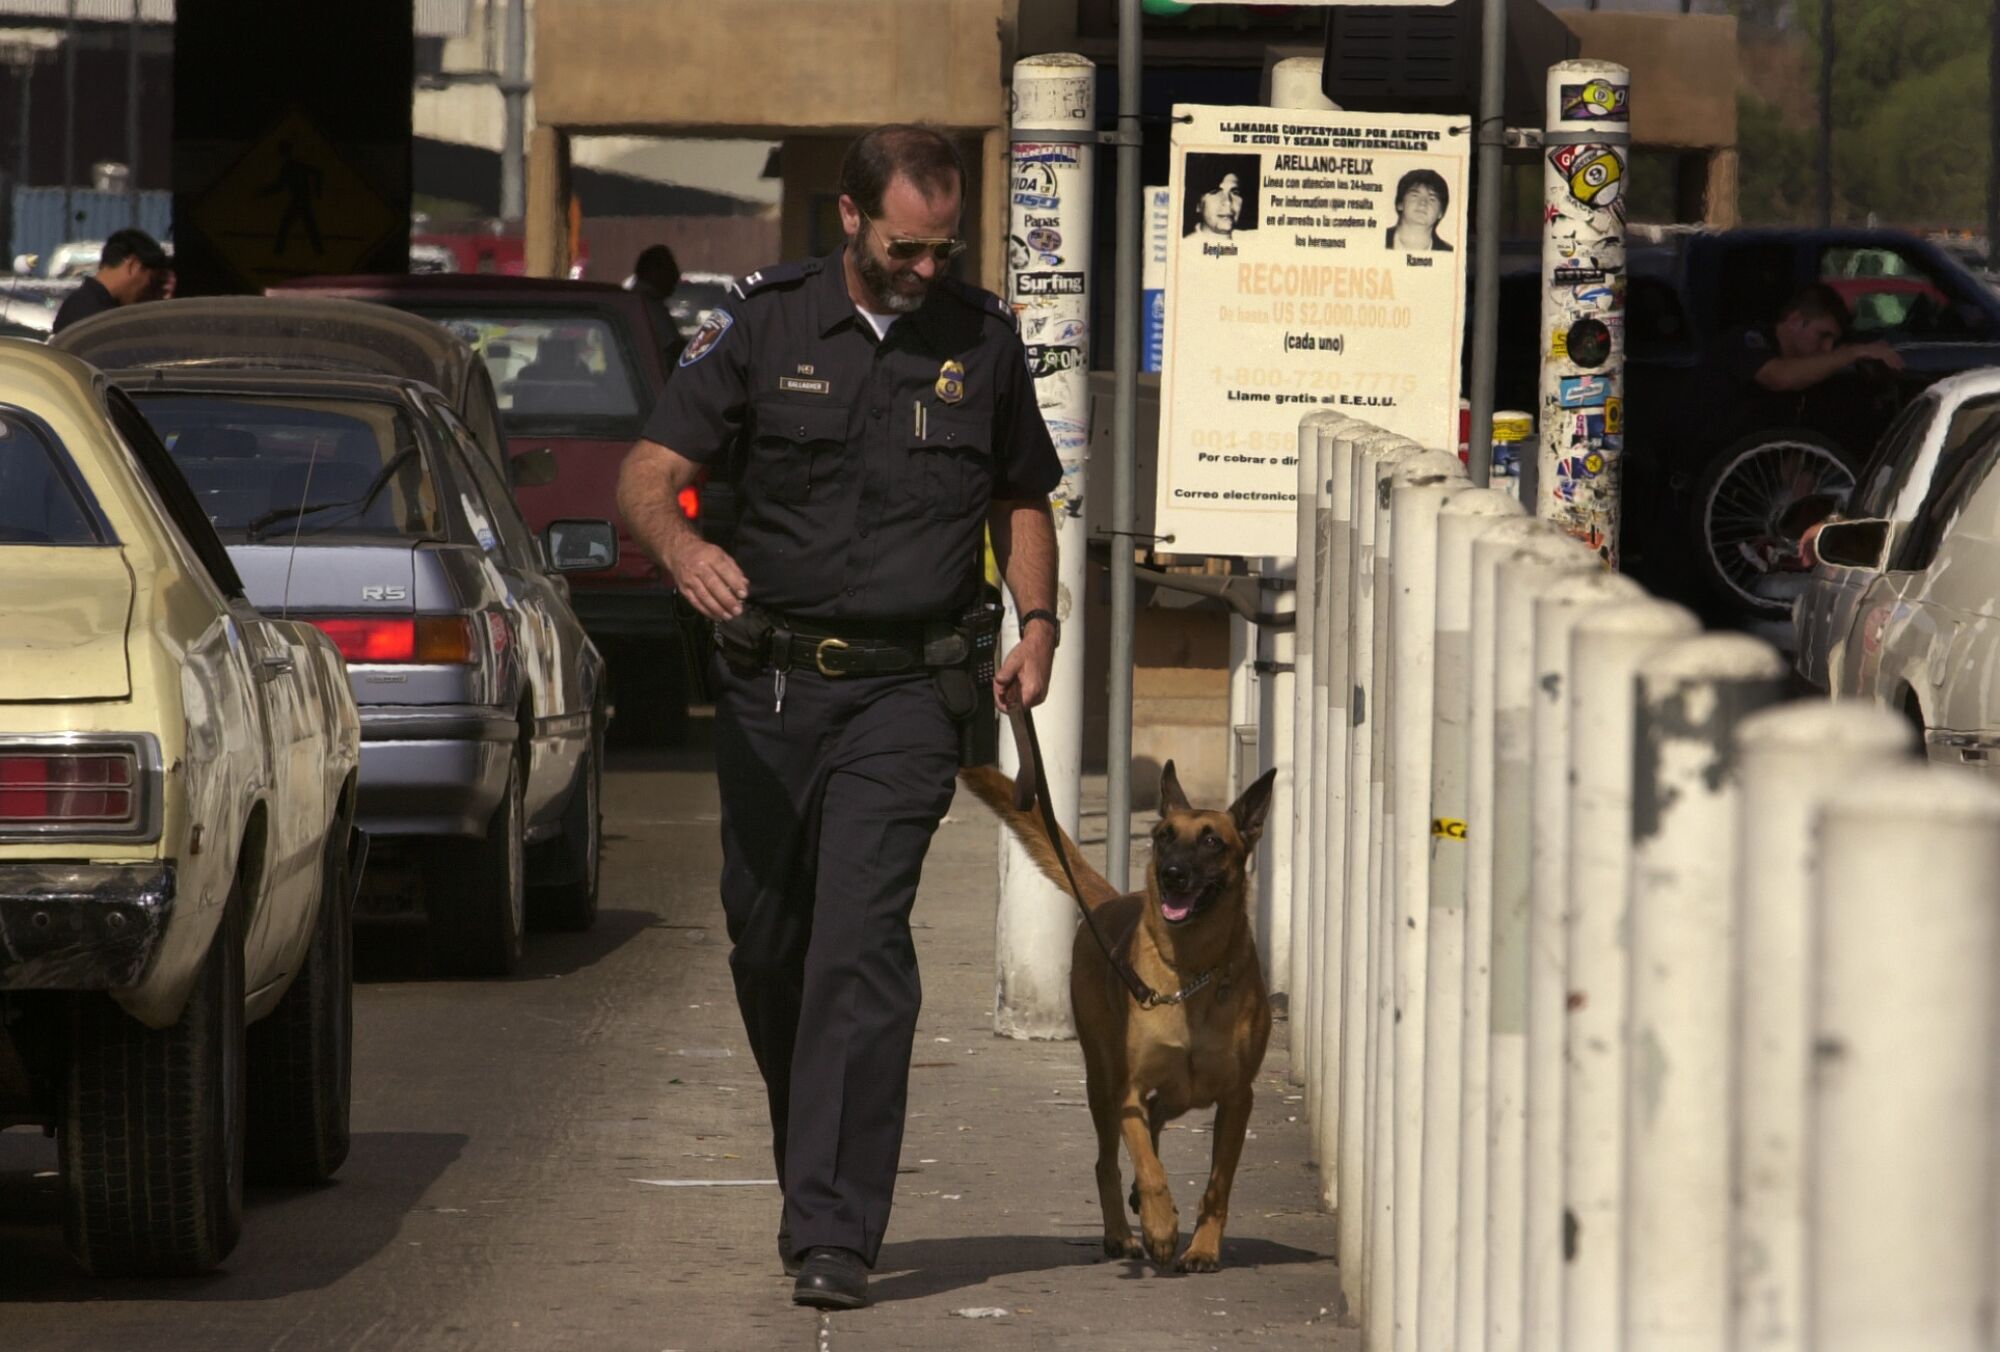 A U.S. Customs agent walks his dog along the lines of cars waiting to cross at the San Ysidro Port of Entry.